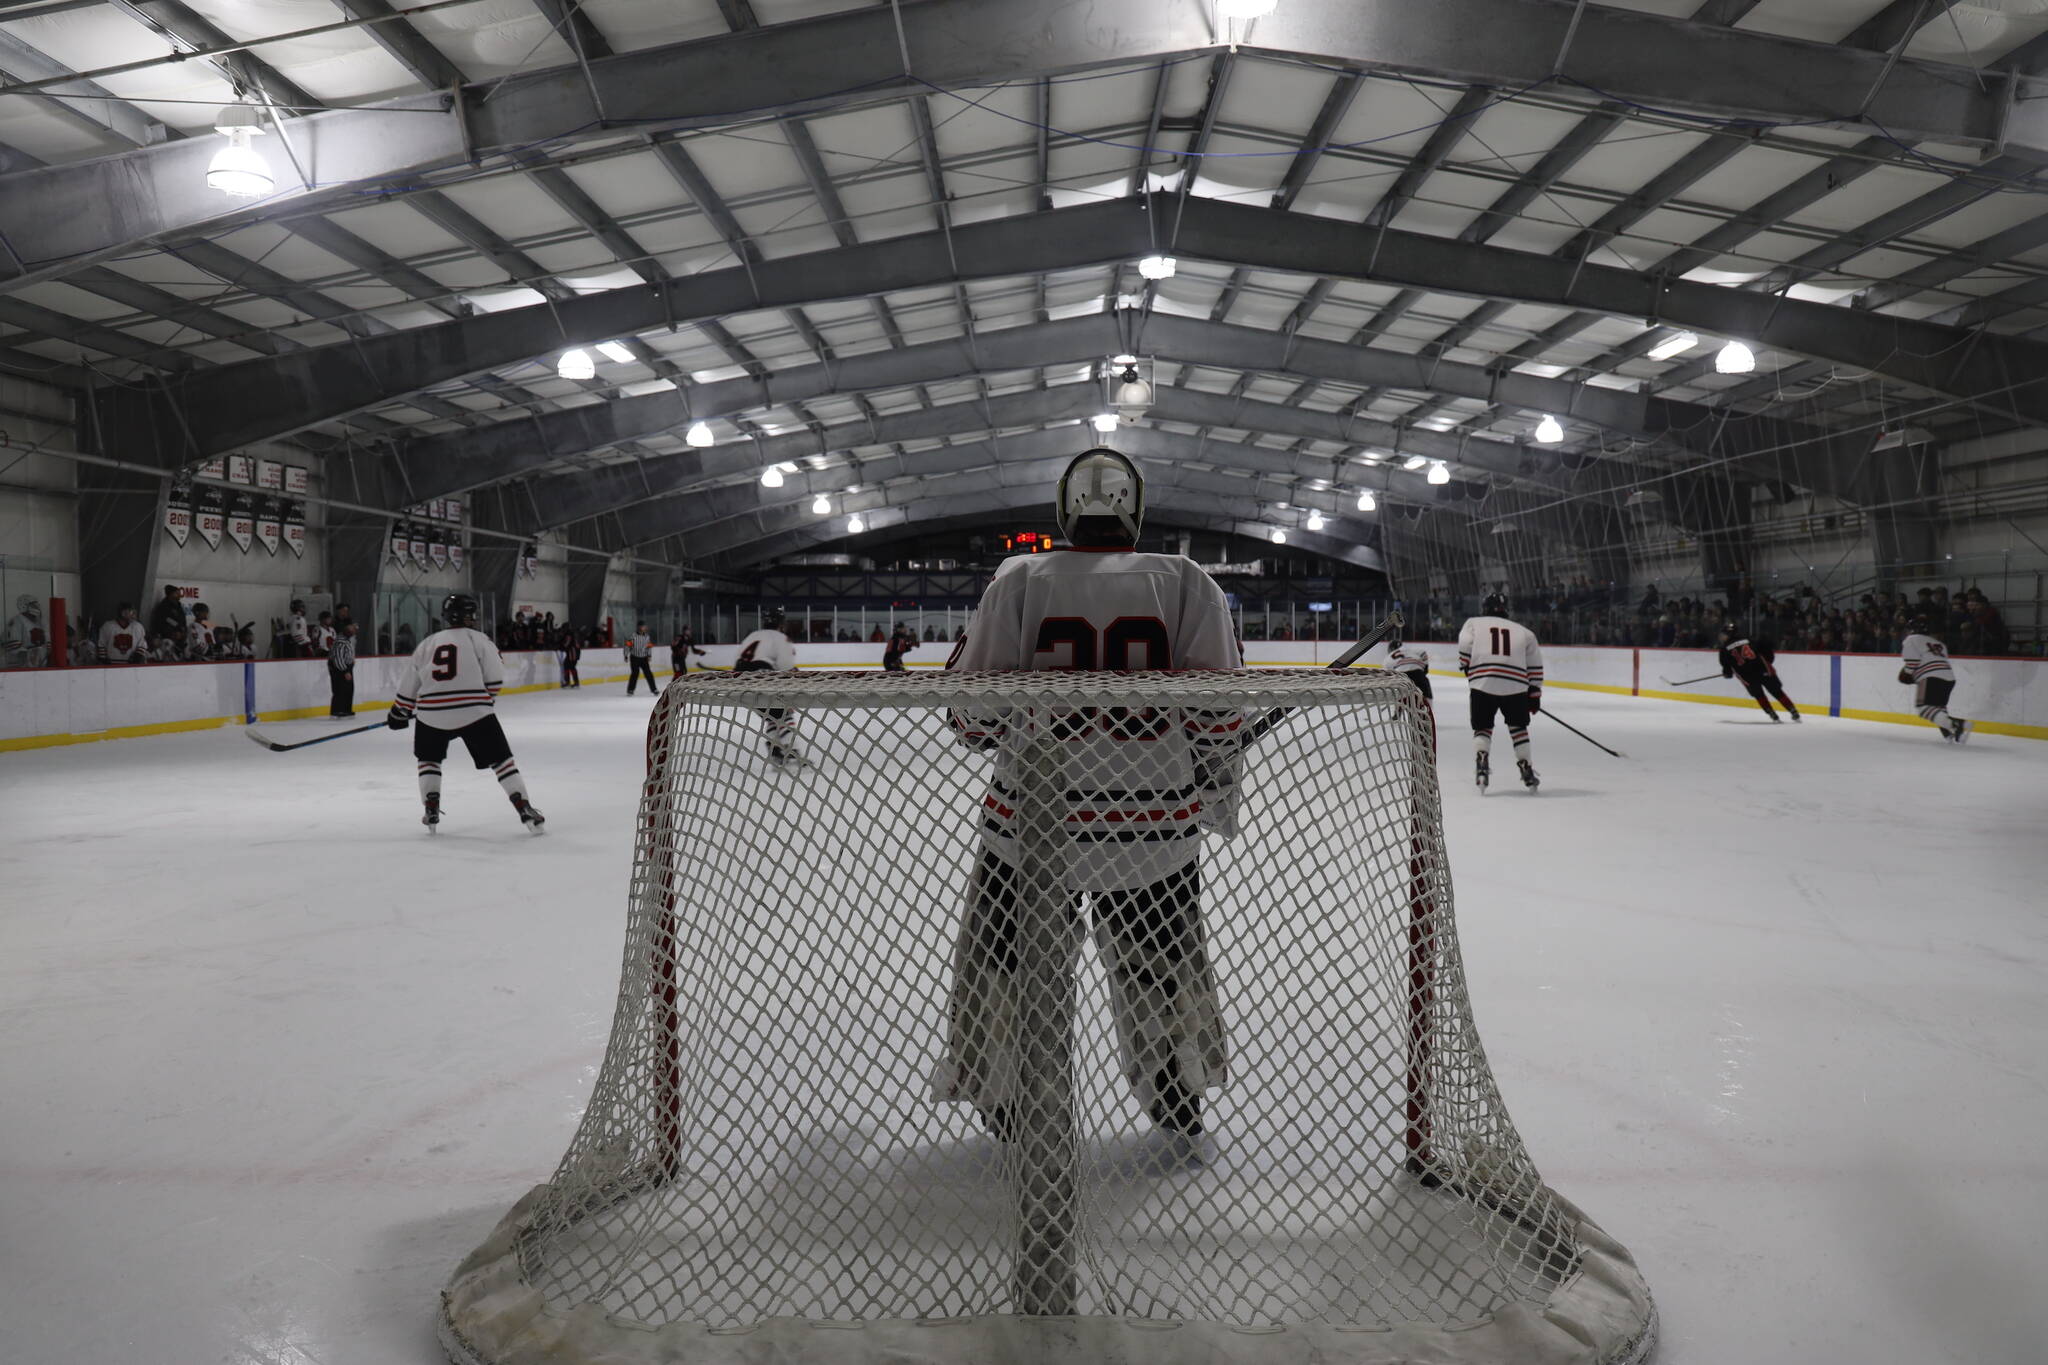 Junior Mason Sooter tends the net as the puck moves to the opposite zone during a home game between Juneau-Douglas High School: Yadaa.at Kalé Crimson Bears Varsity hockey team and the Kenai Central Kardinals at the Treadwell Arena Saturday afternoon. (Clarise Larson / Juneau Empire)